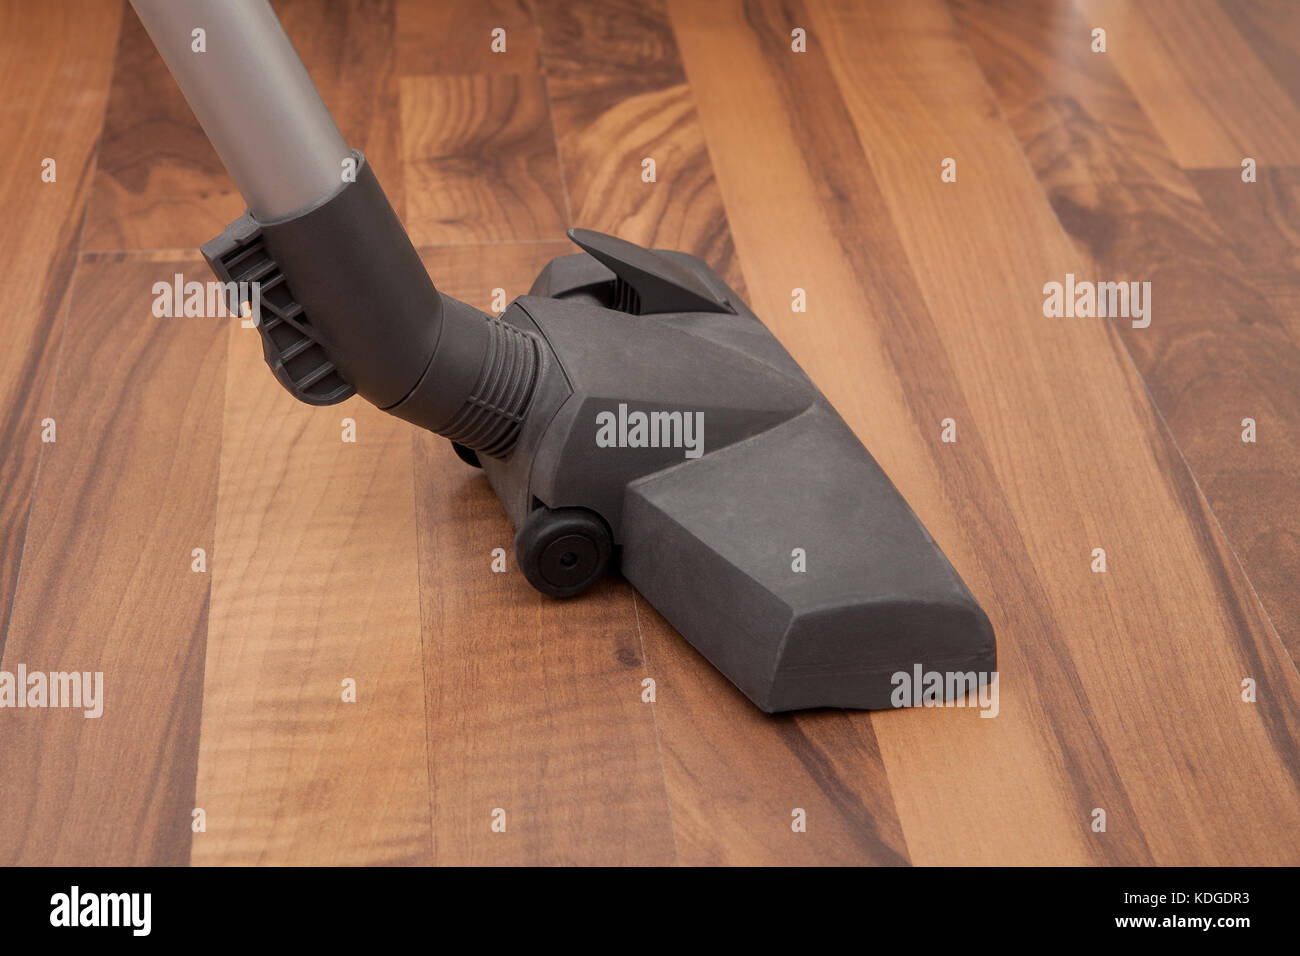 Close-up Of Vacuum Cleaner Cleaning Hardwood Floor Stock Photo